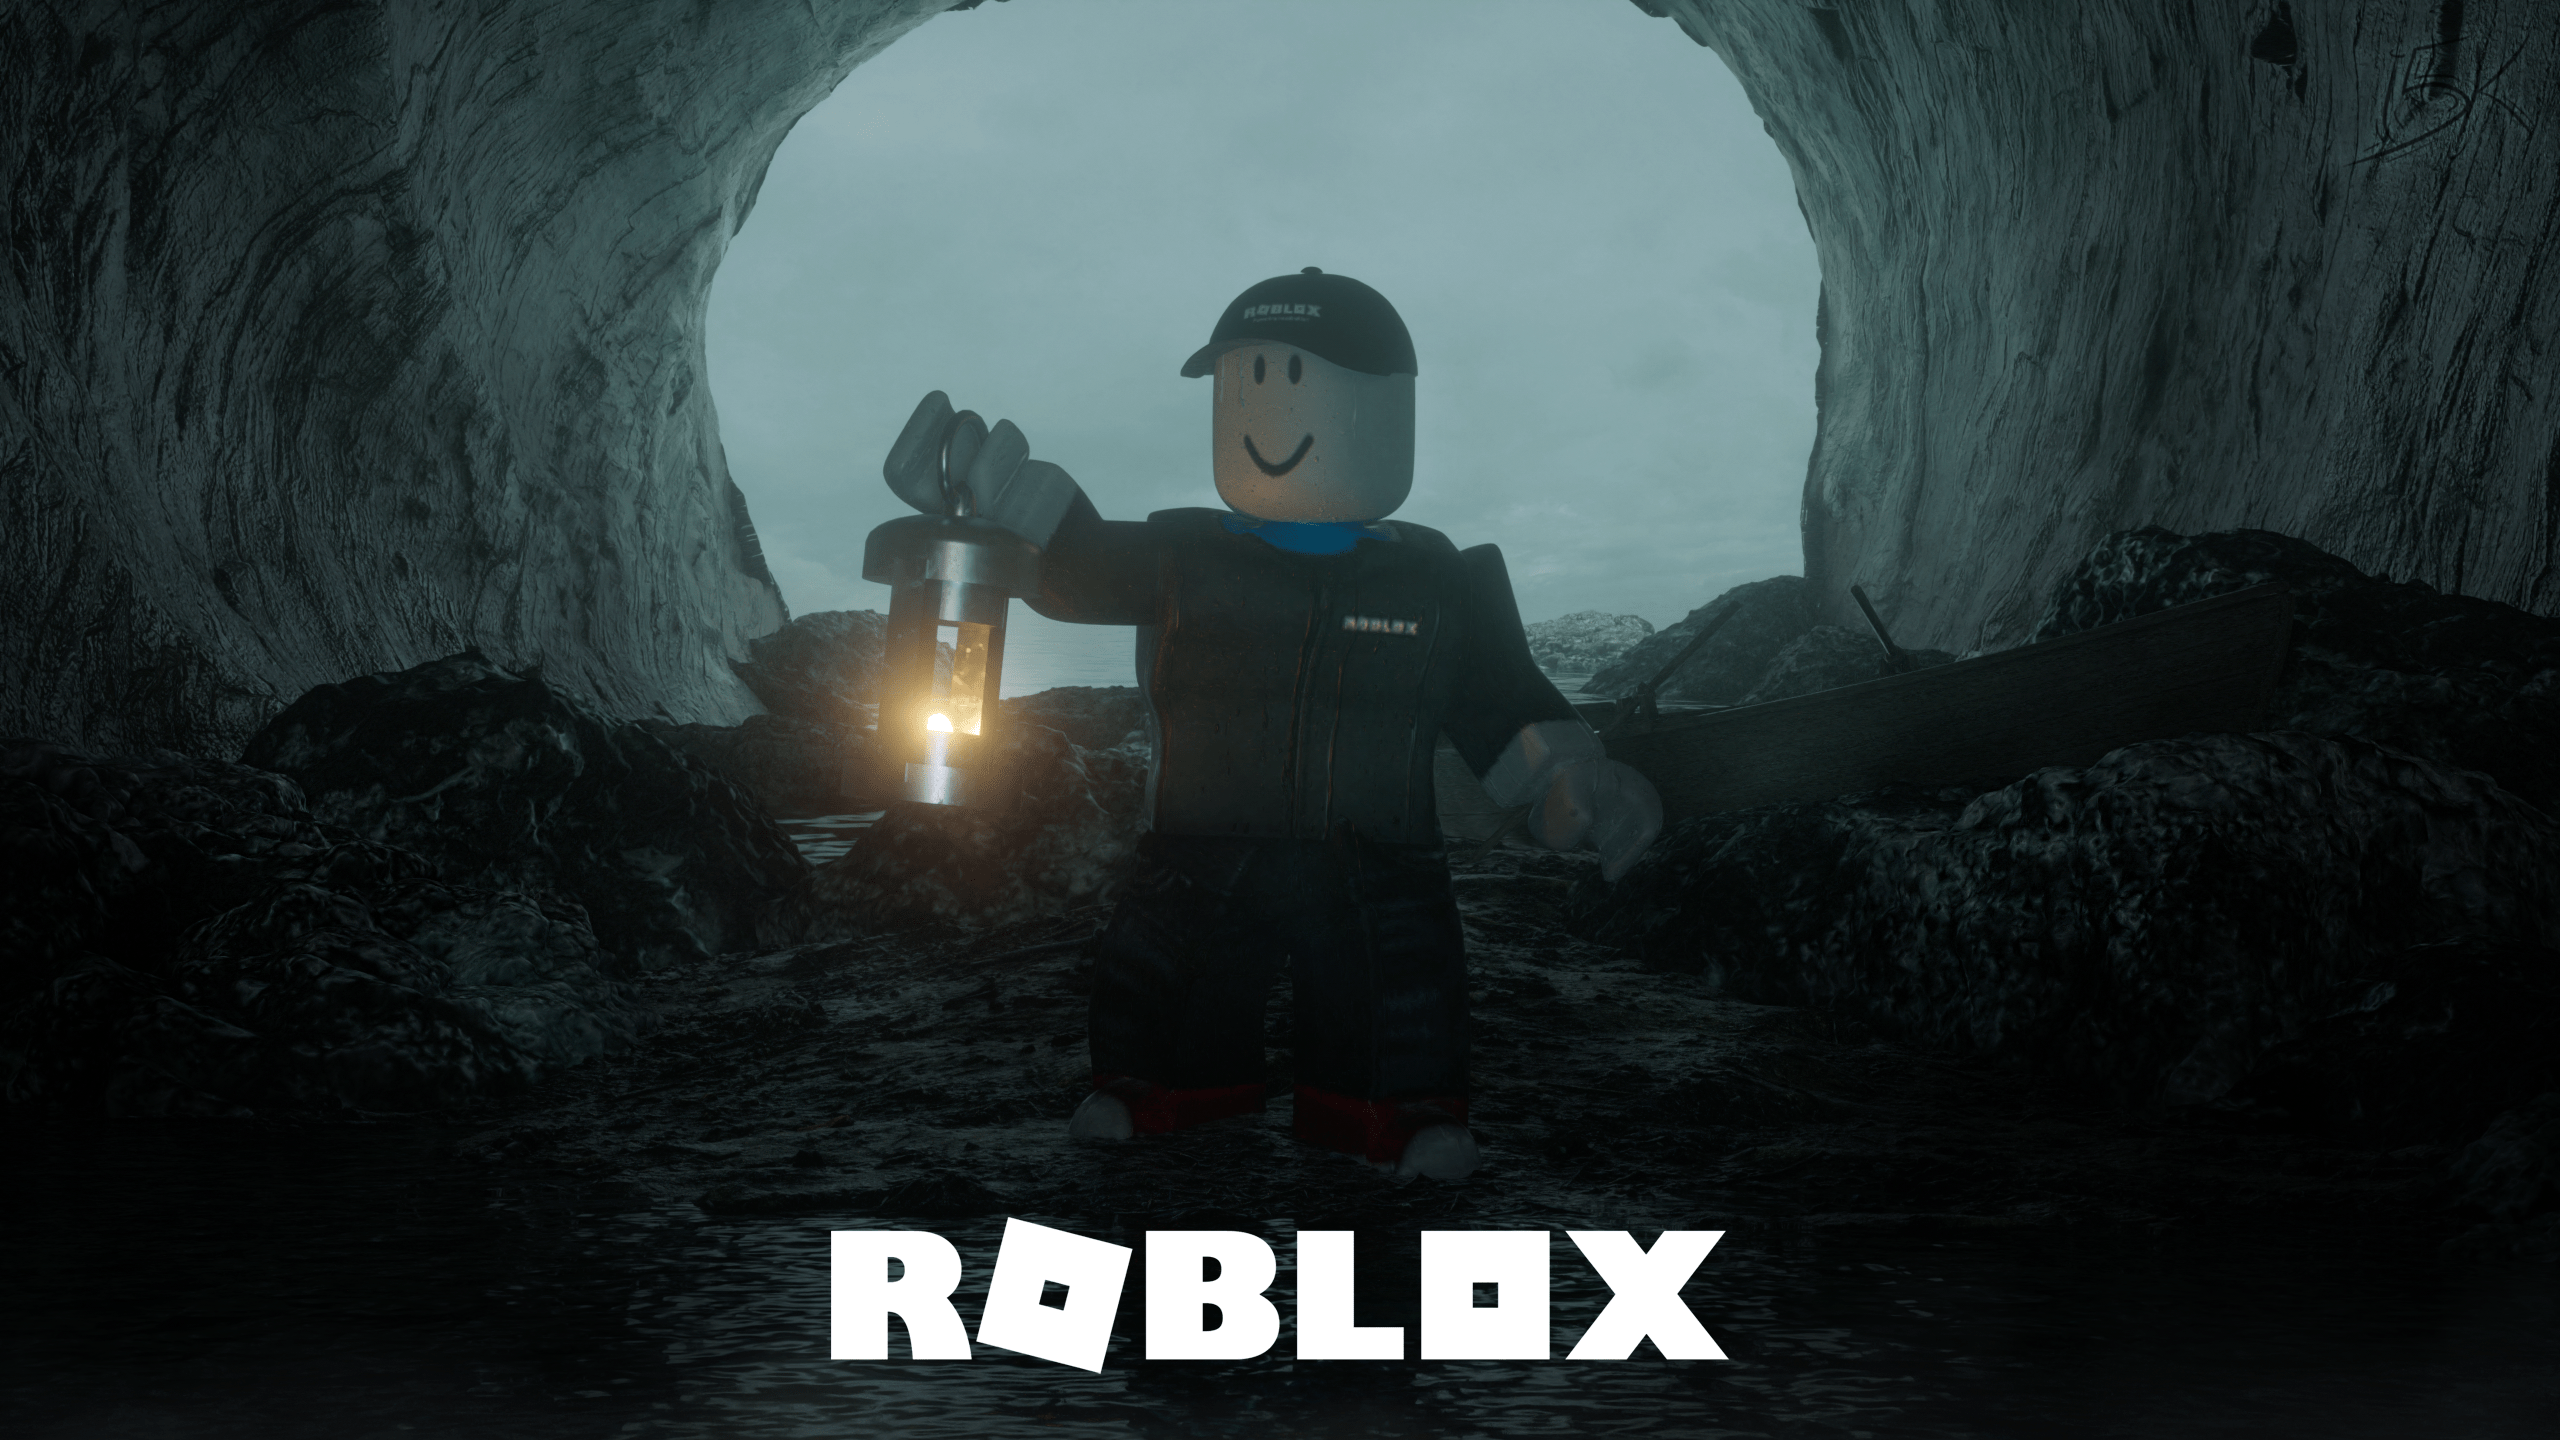 Roblox Gaming Wallpapers Top Free Roblox Gaming Backgrounds Wallpaperaccess - banner de roblox 2560x1440